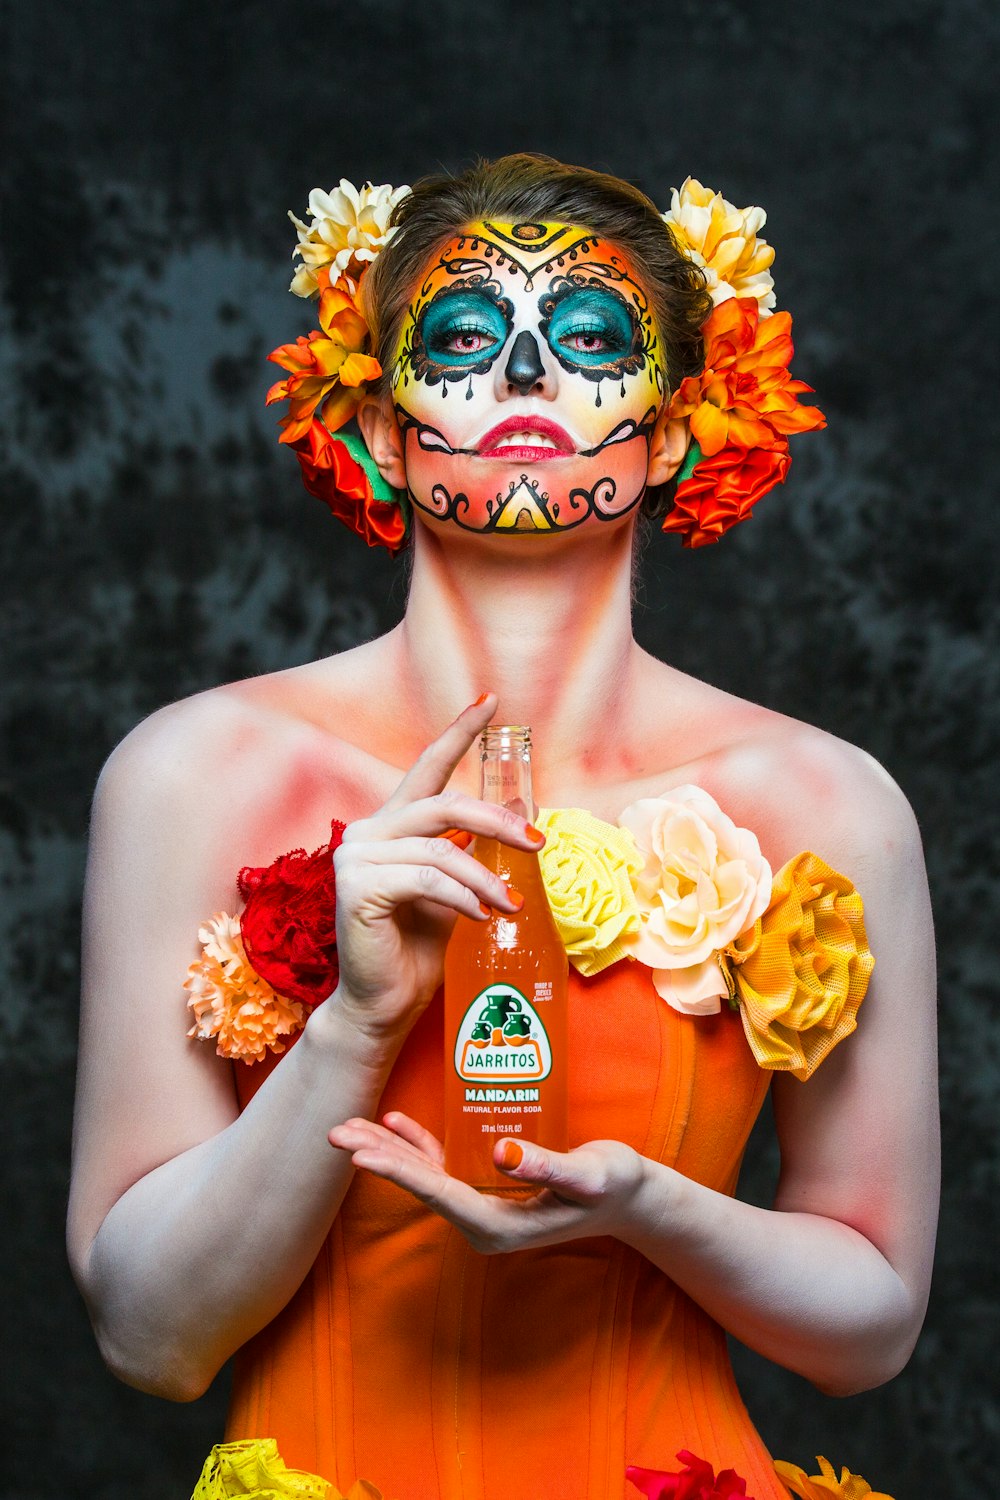 woman with yellow and red floral headdress holding bottle with red liquid